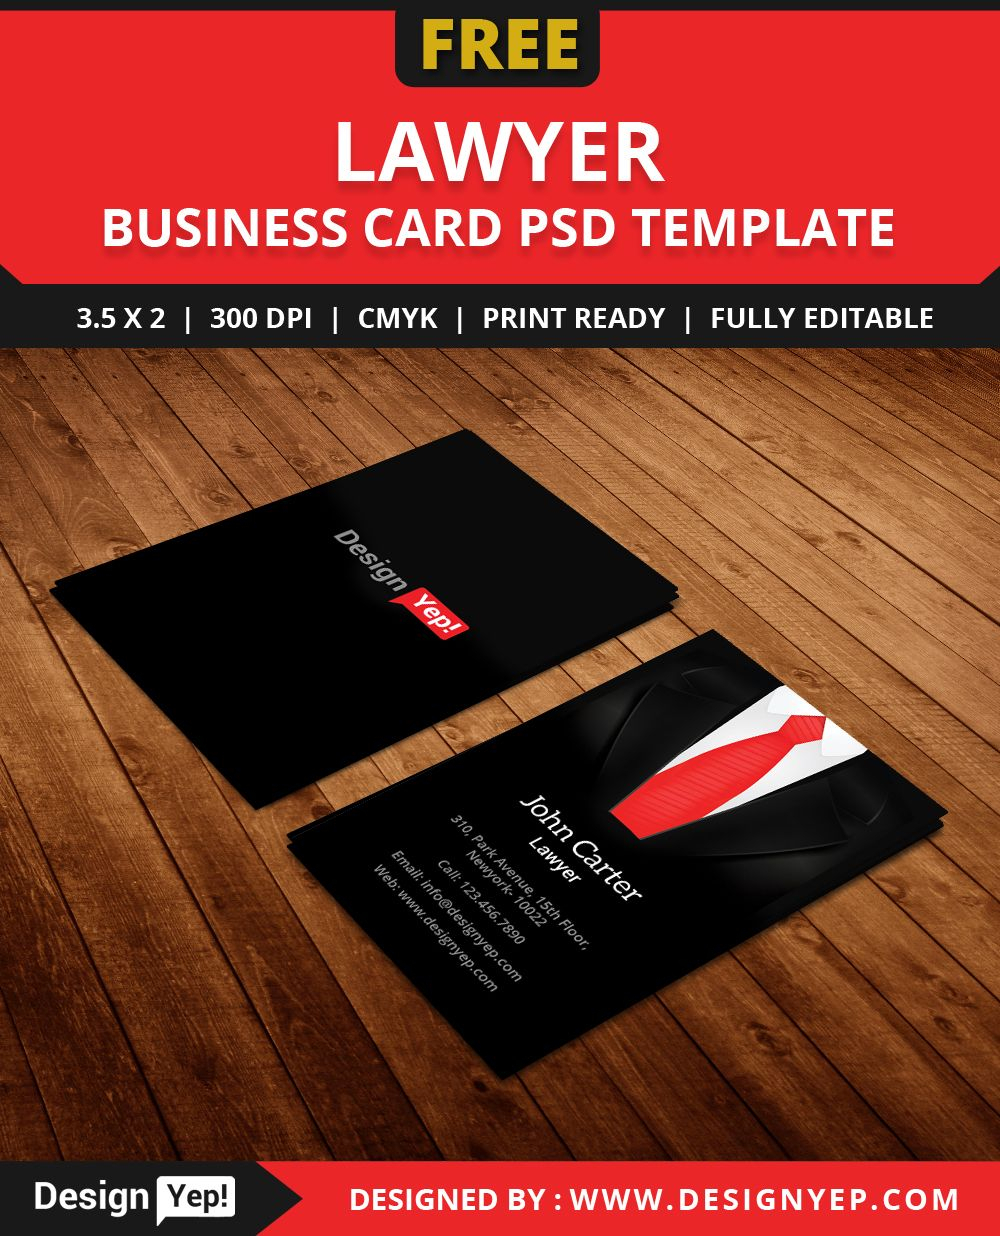 Free Lawyer Business Card Template Psd | Lawyer Business Within Legal Business Cards Templates Free